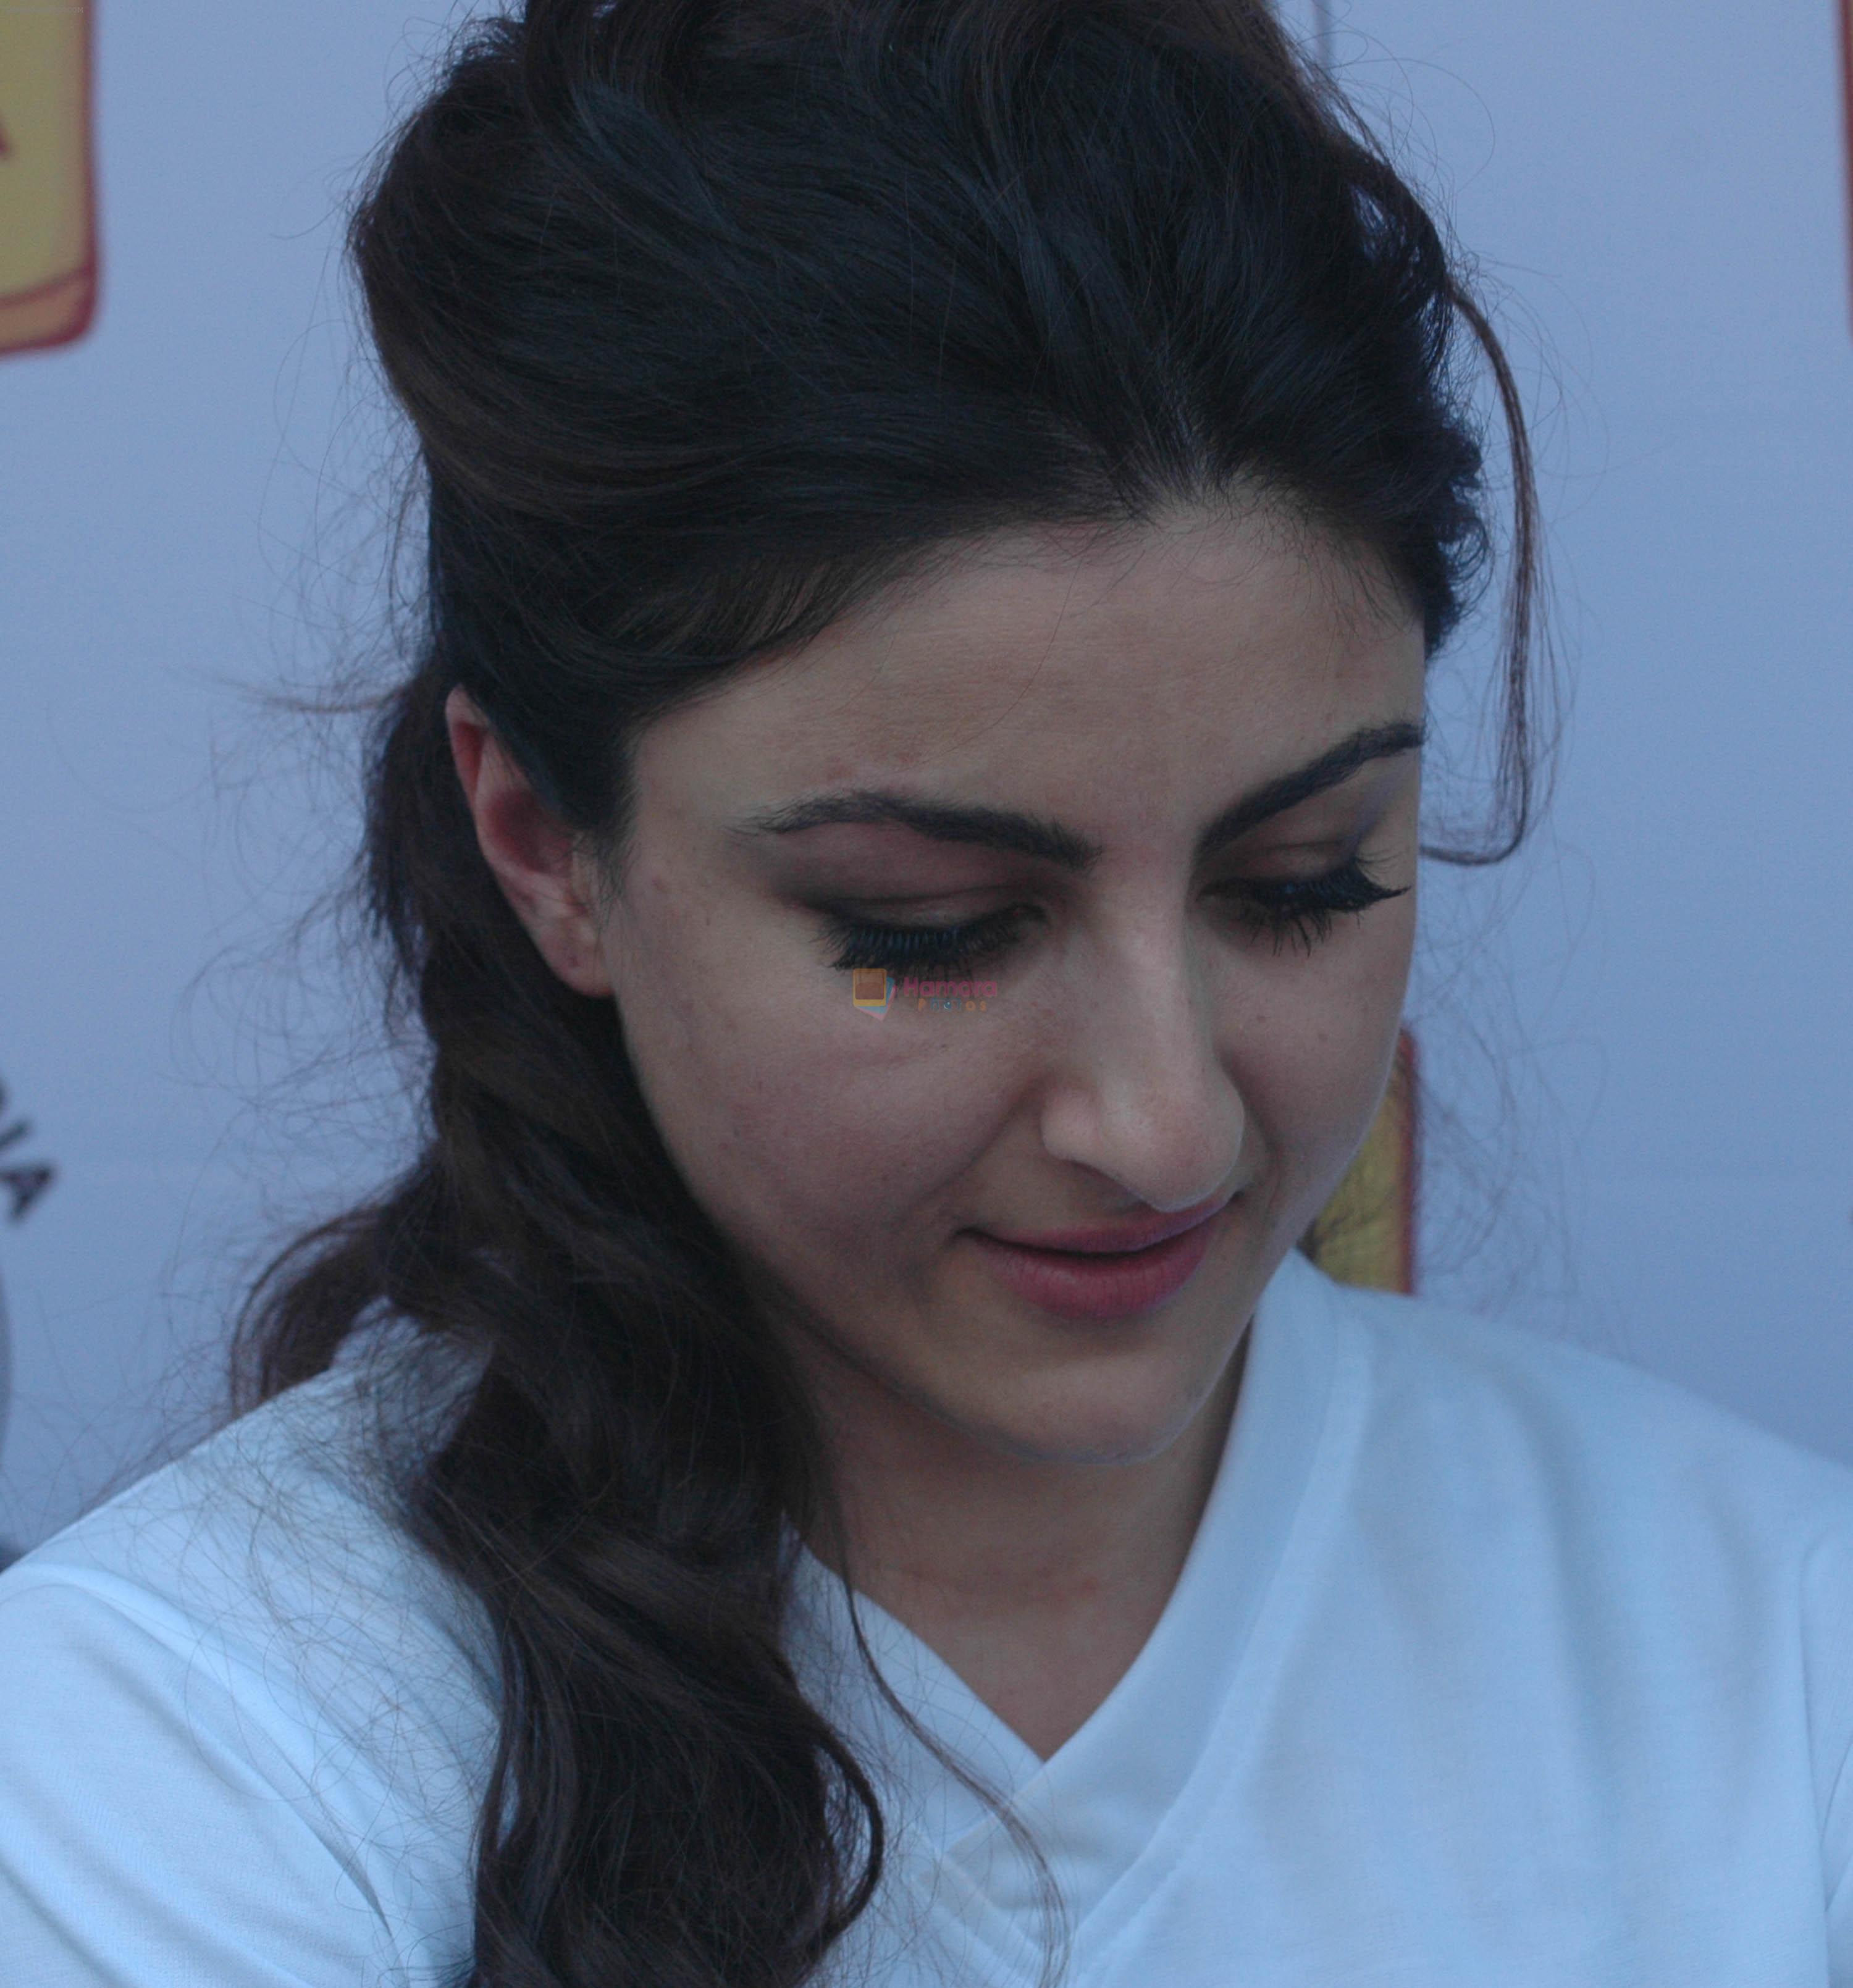 Soha Ali Khan in a charity for a School at Deganga West Bengal on 14th March 2014